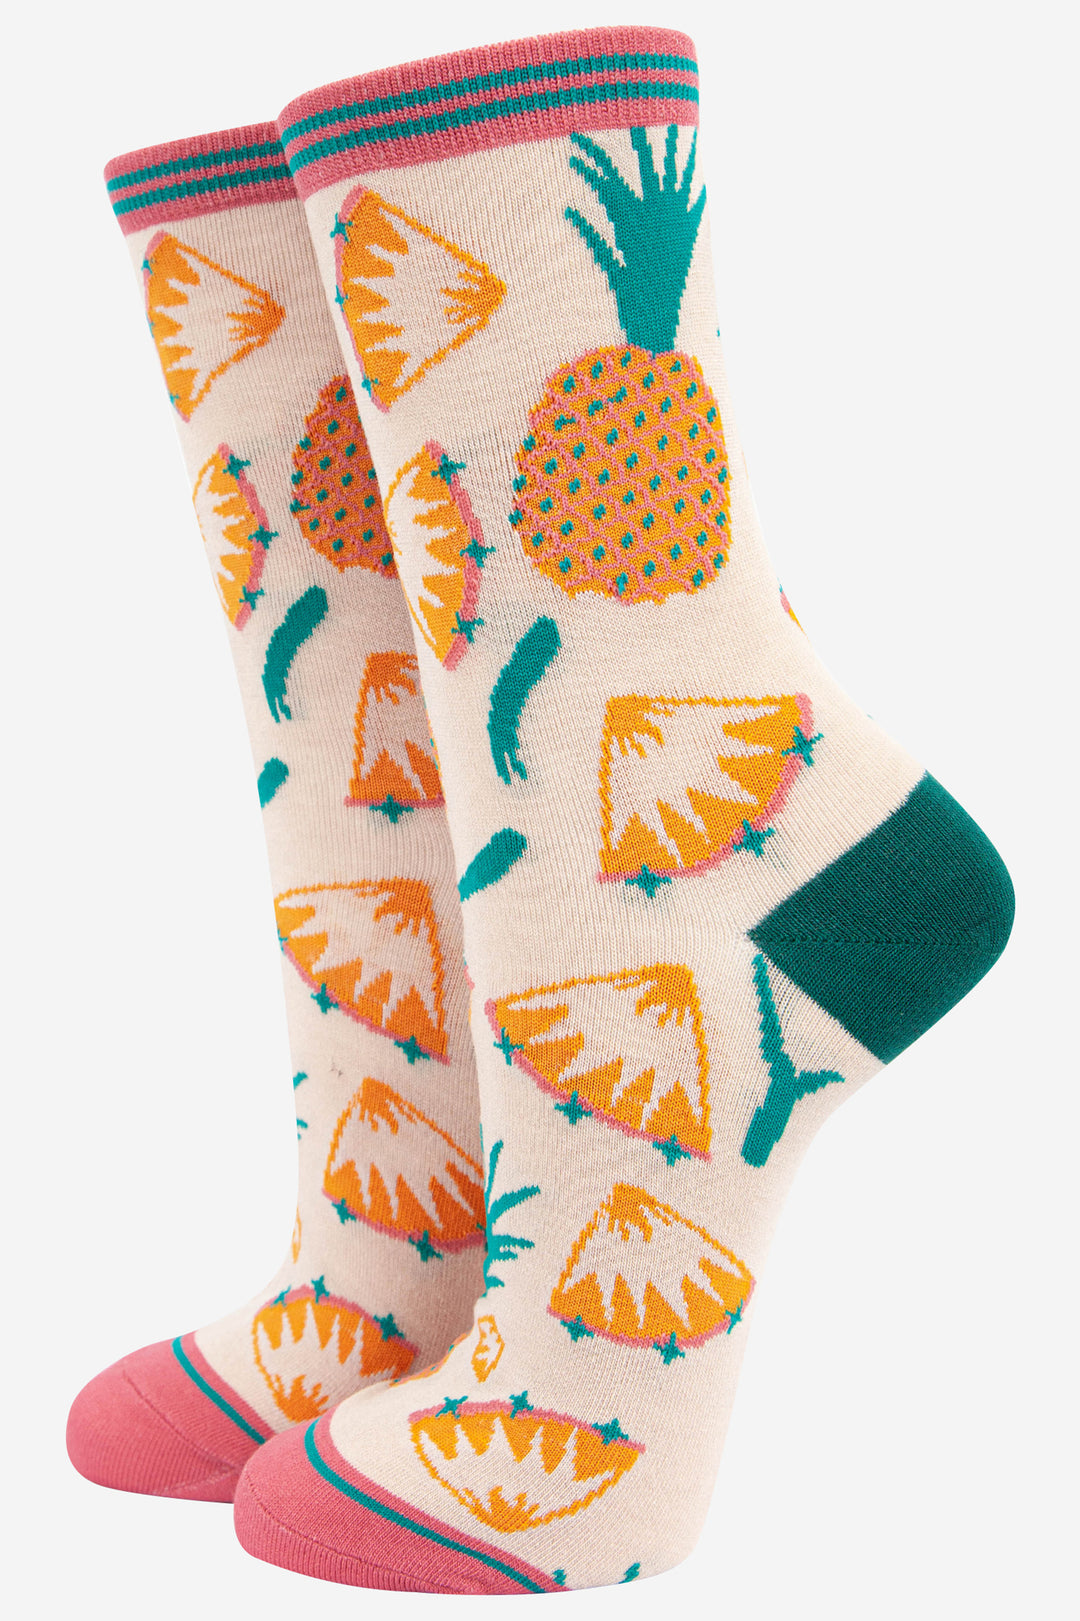 cream and pink bamboo ankle socks with an all over pattern of pineapples and pineapple slices